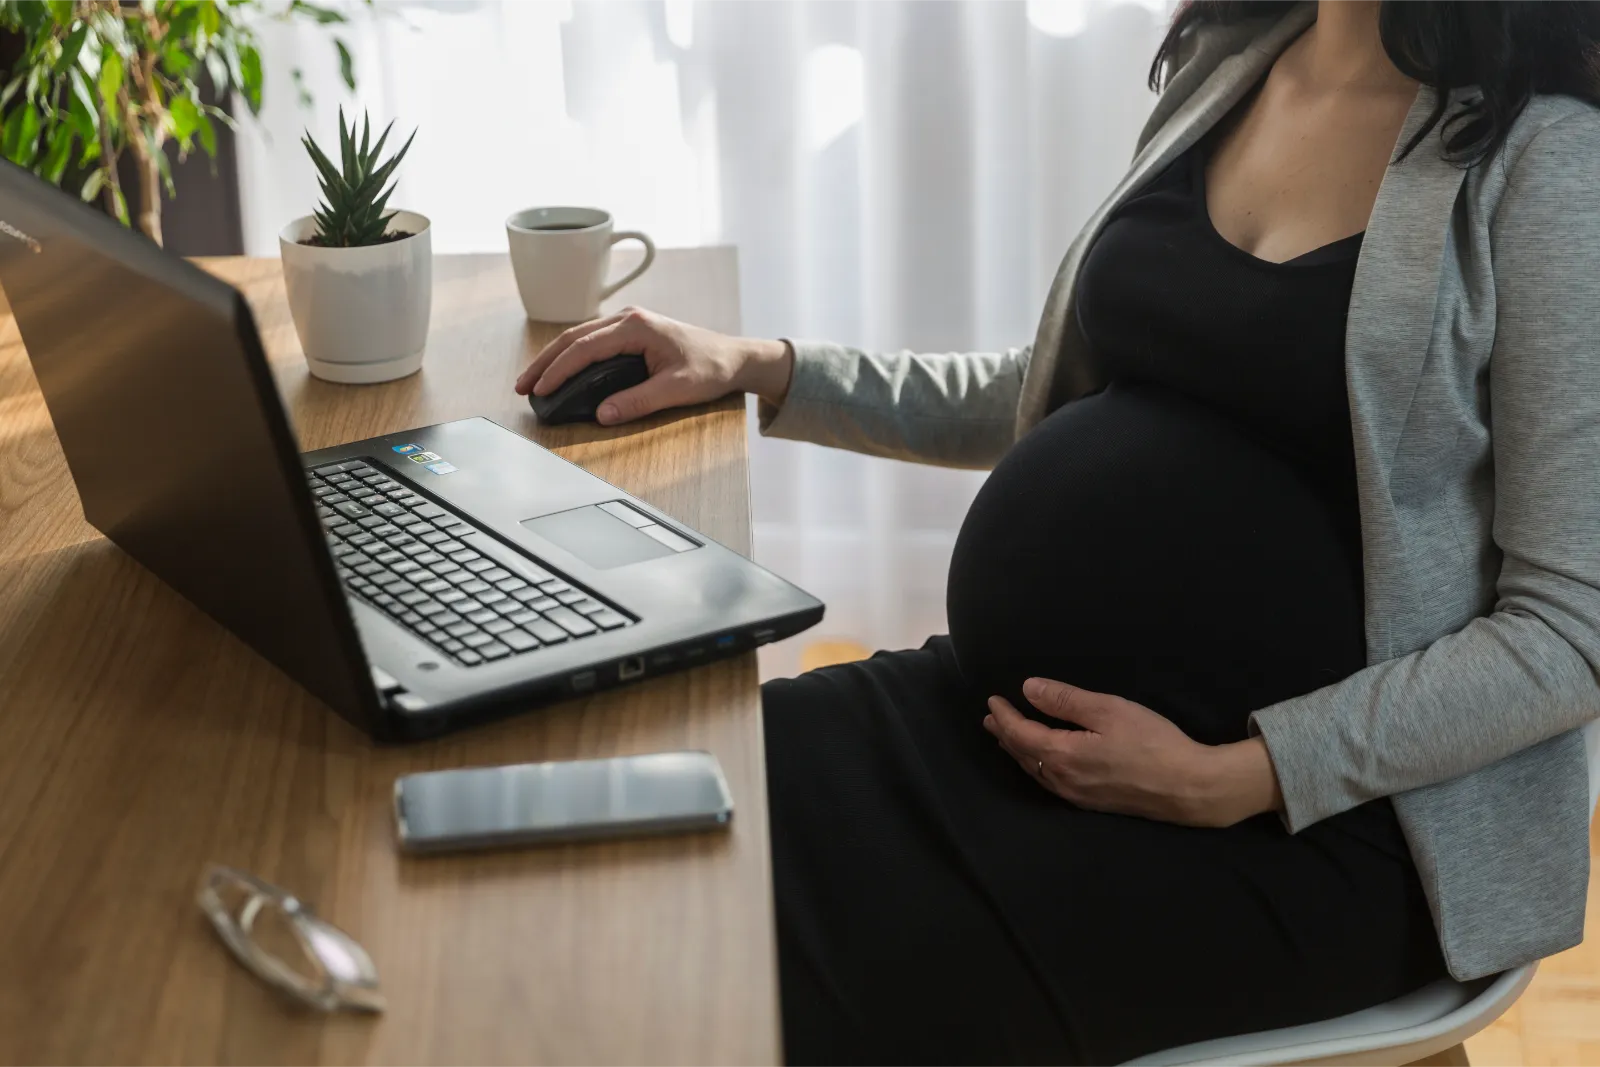 pregnant on a worker visa 1